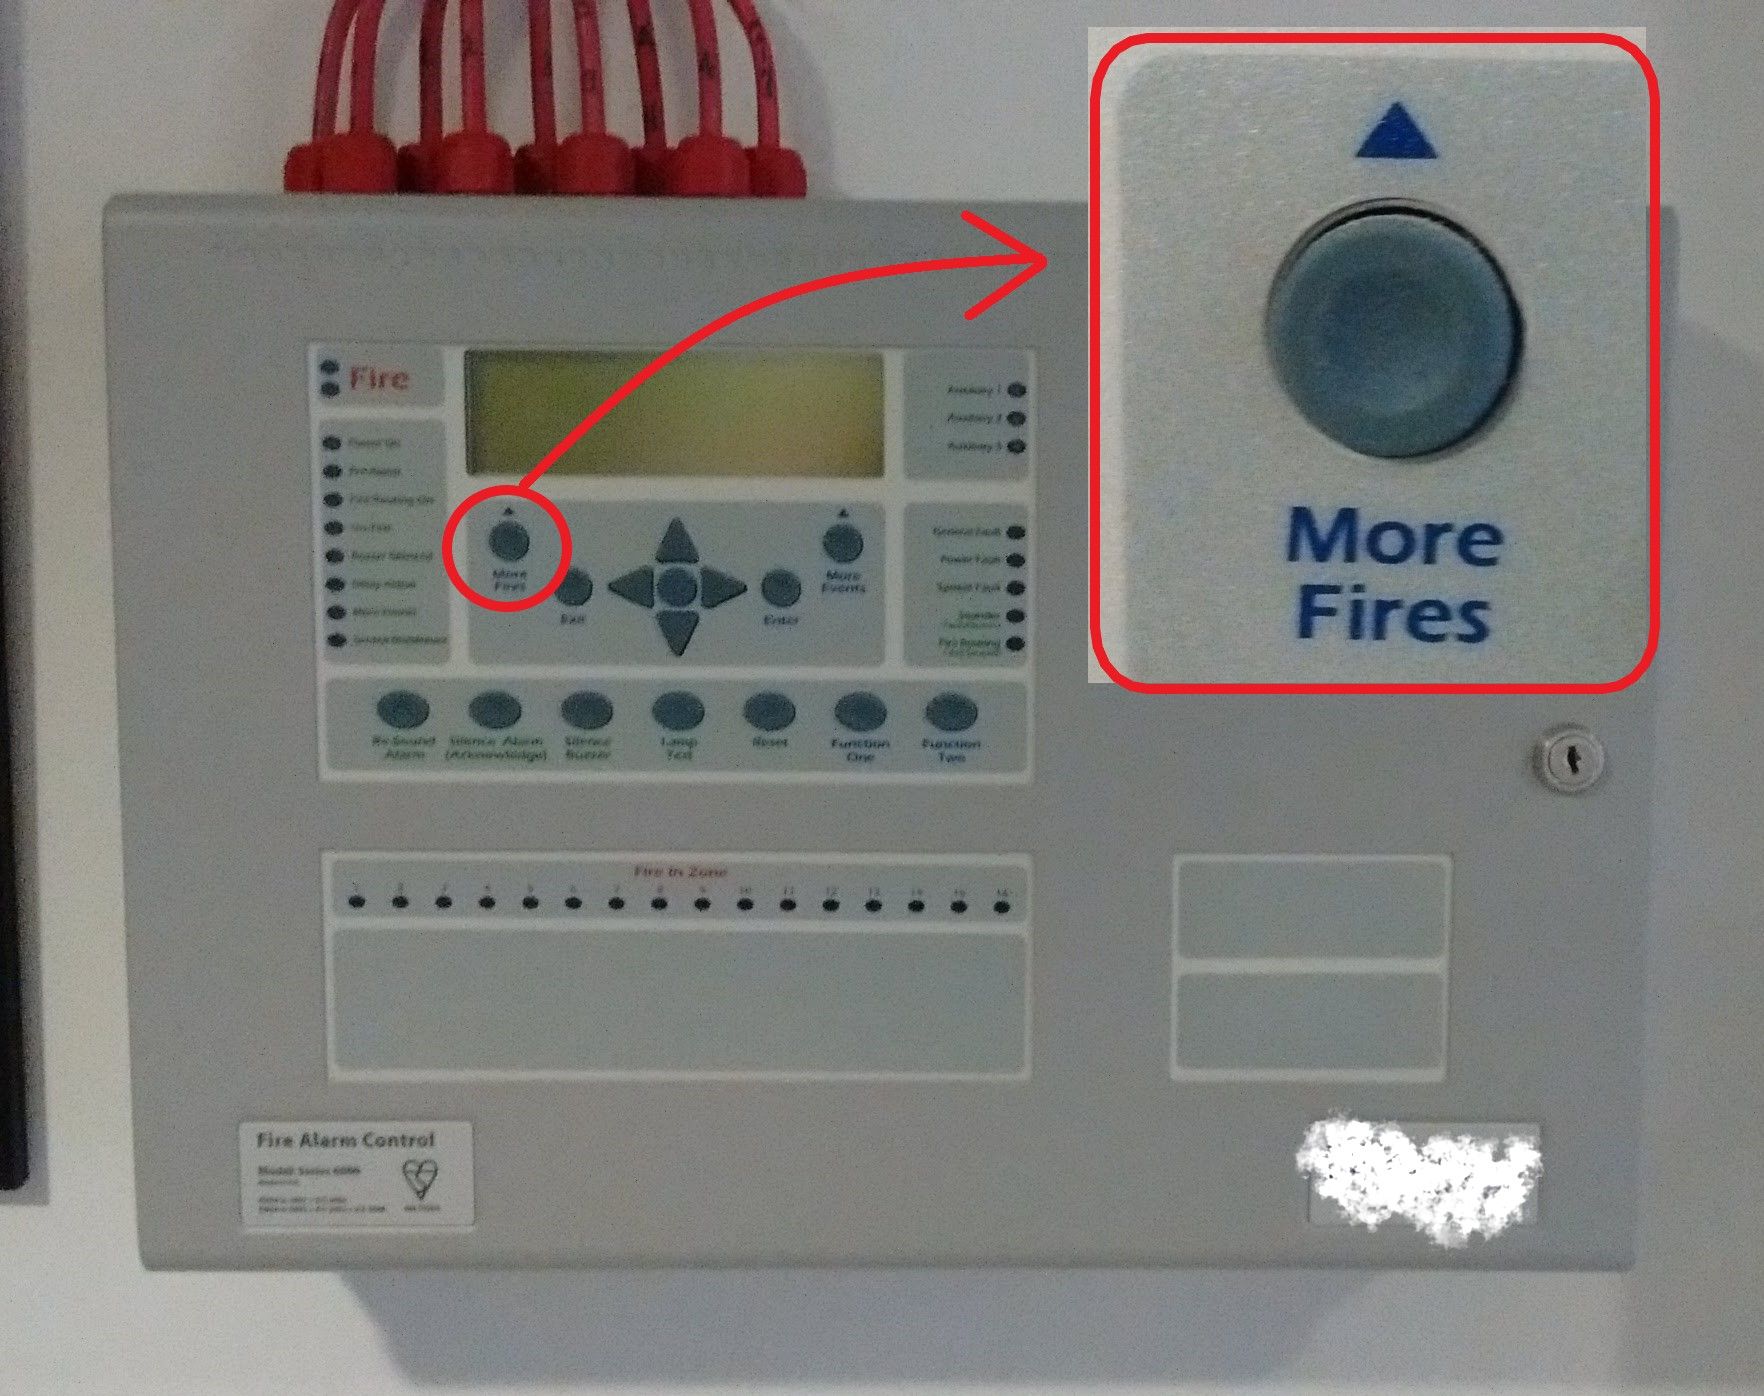 The new fire alarm system has an exciting feature...